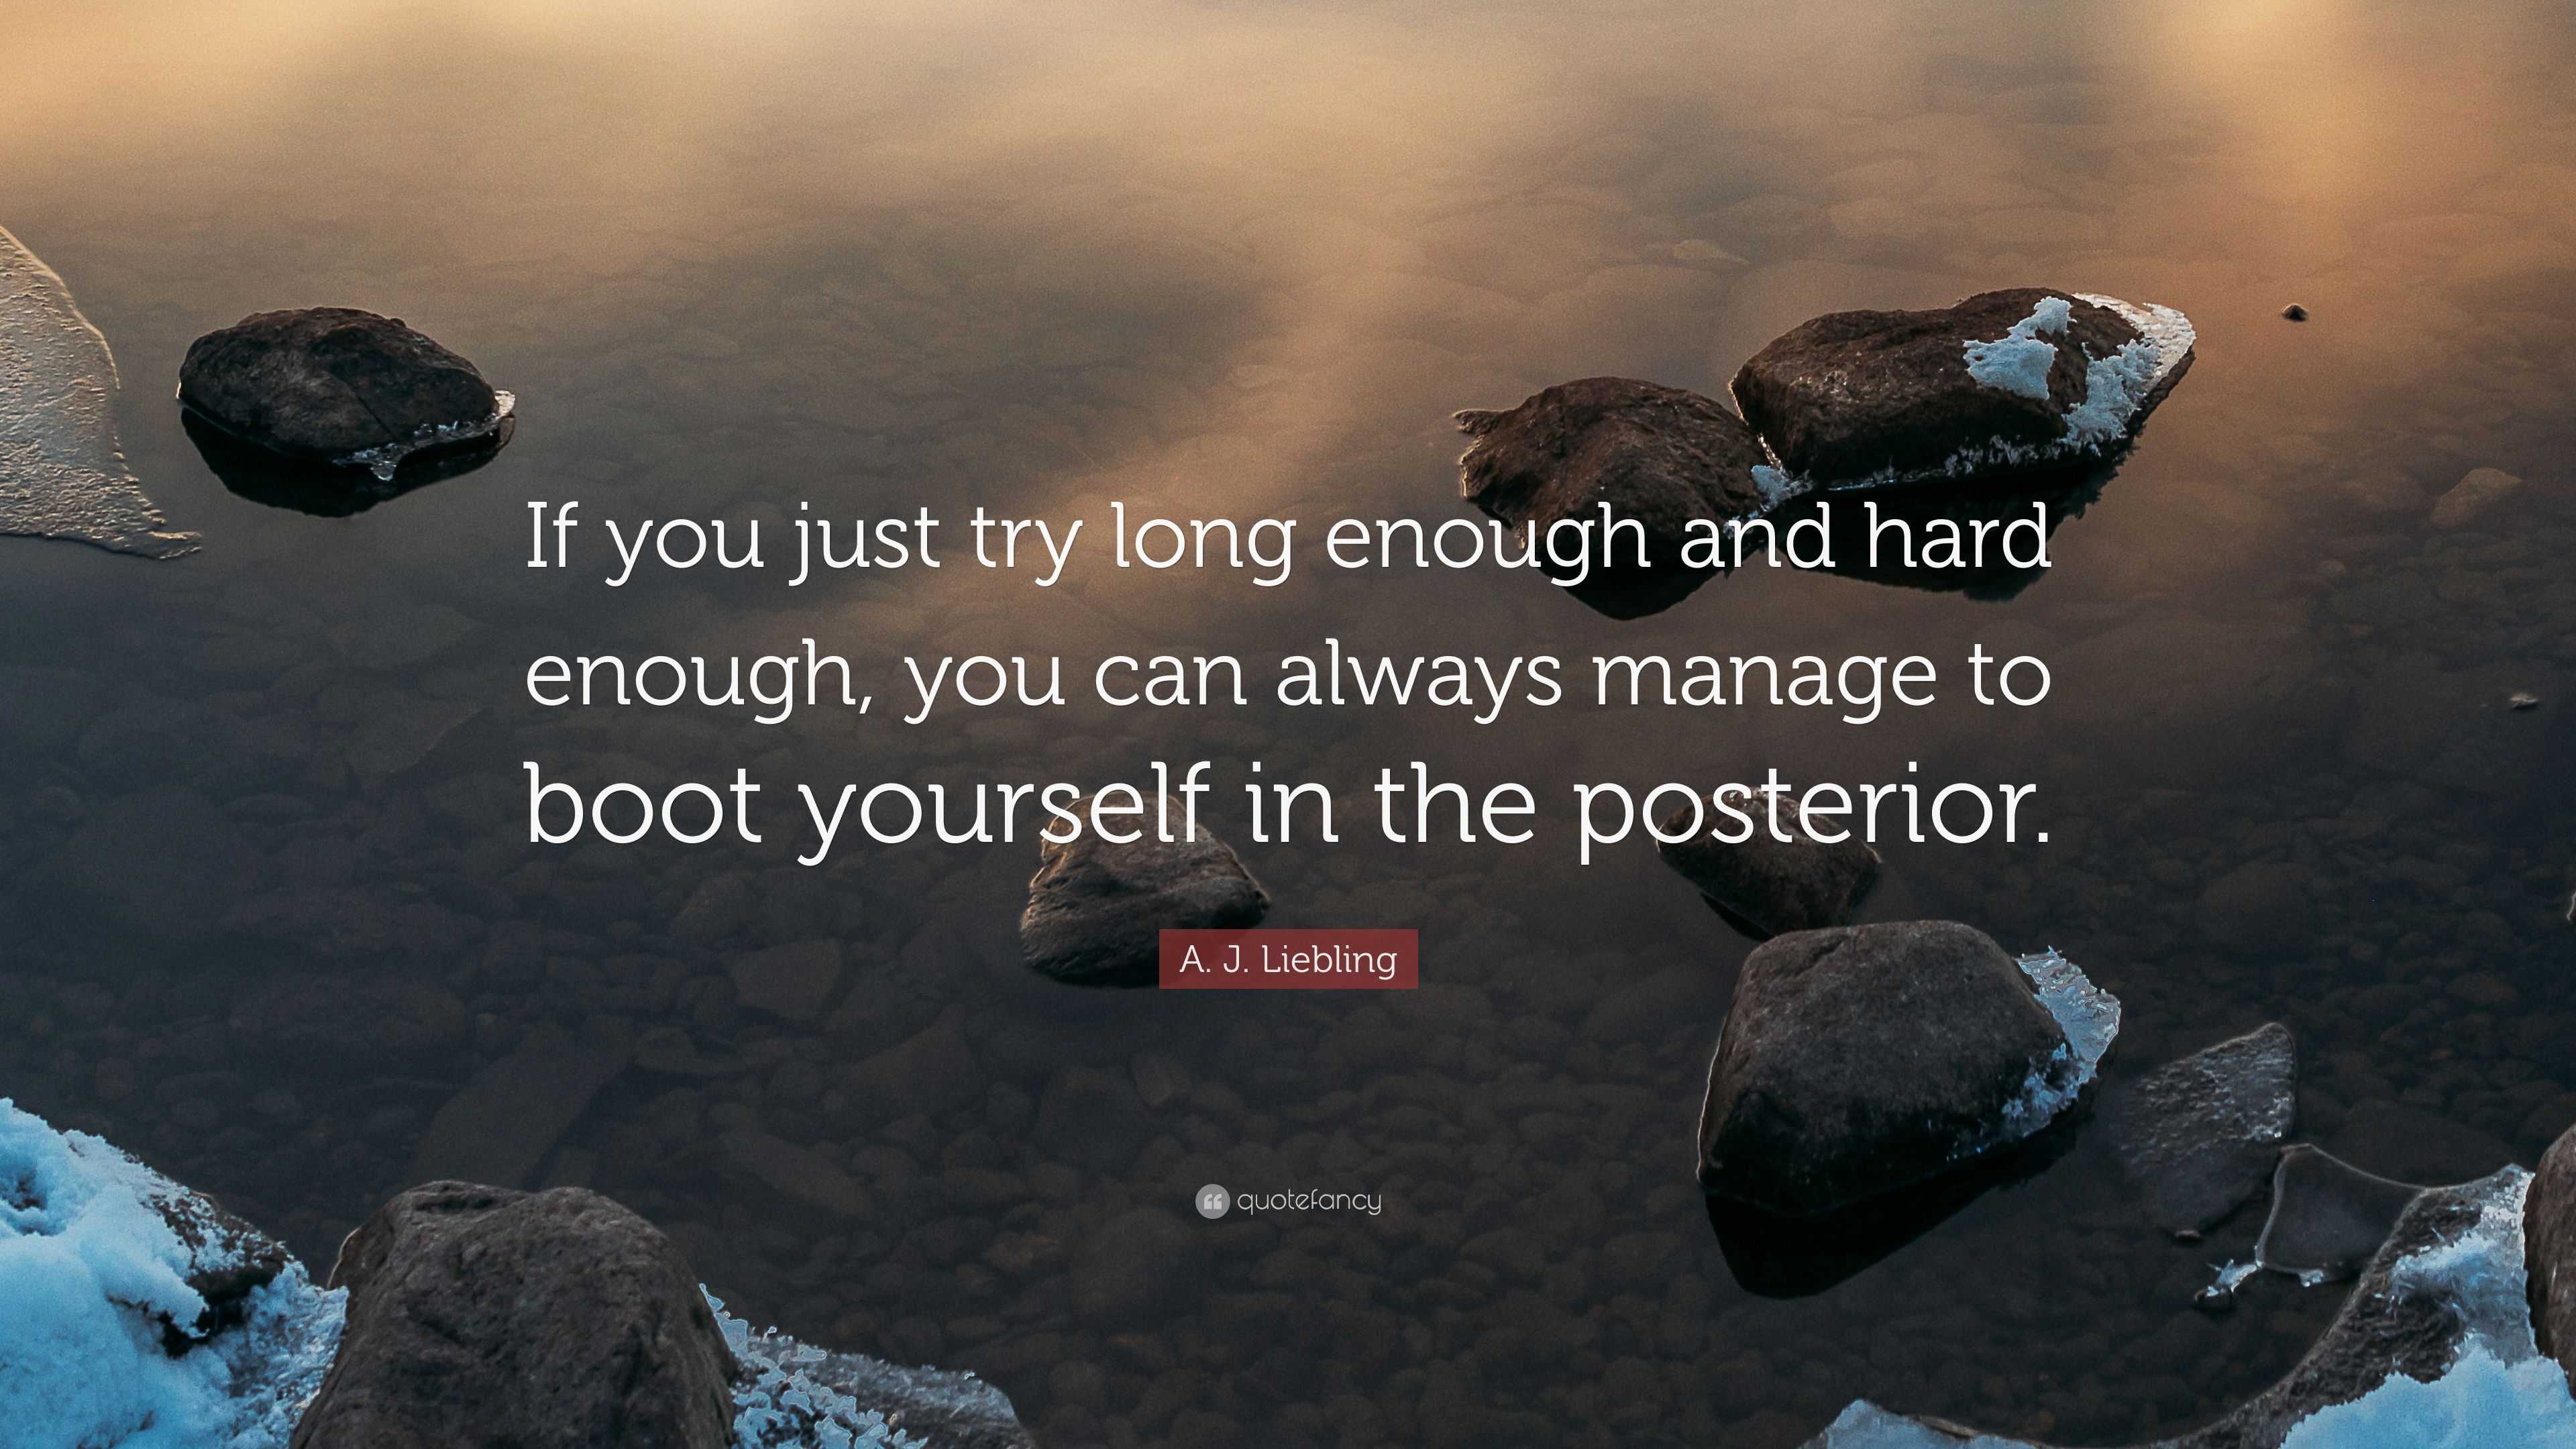 A. J. Liebling Quote: “If you just try long enough and hard enough, you ...